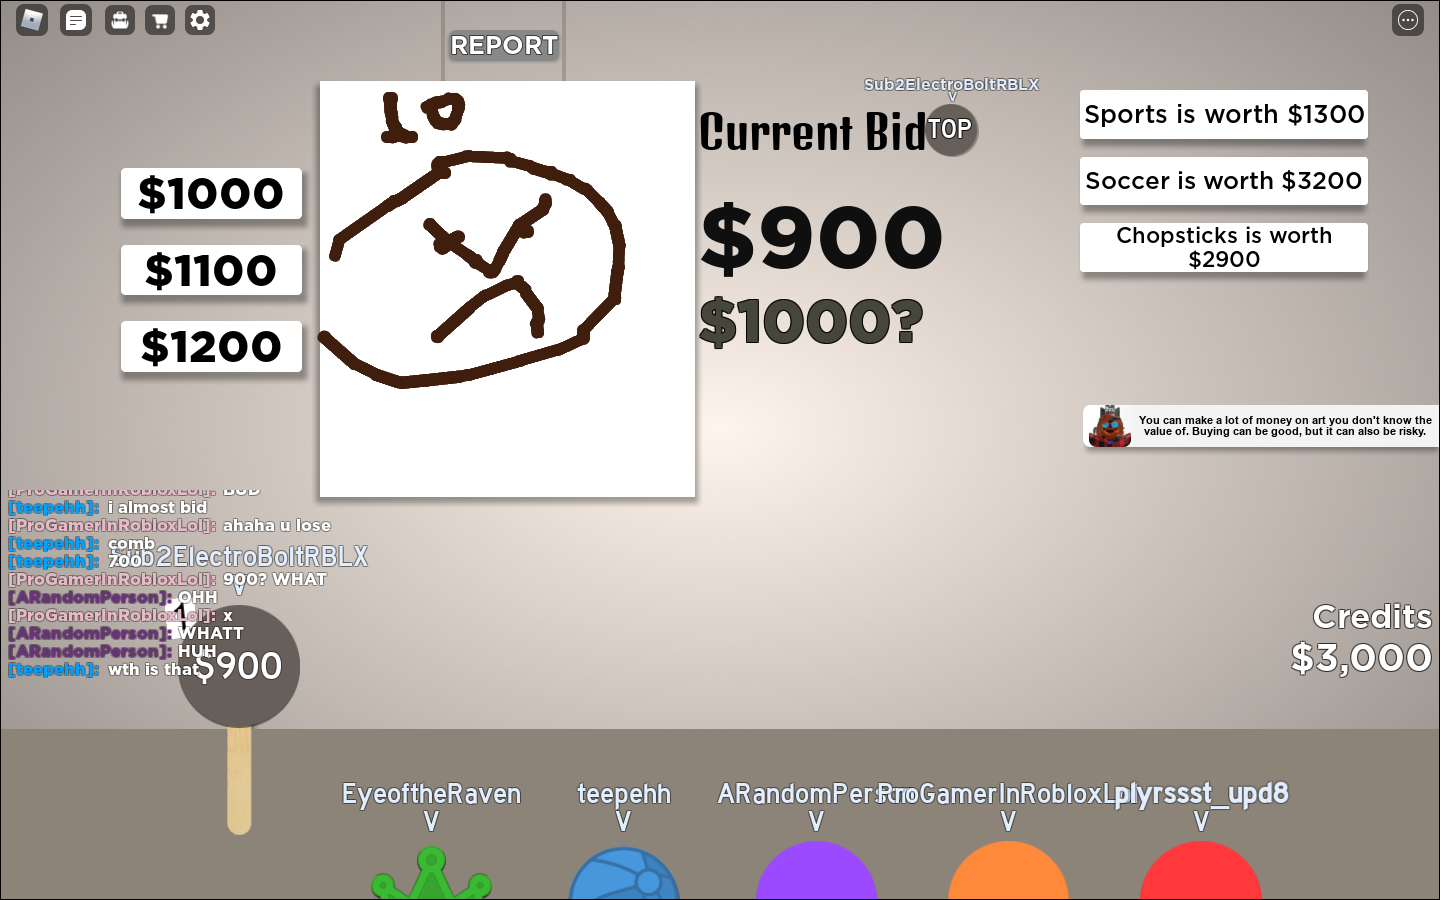 Roblox Idiotic Investing Codes for November 2022: Free coins and rewards